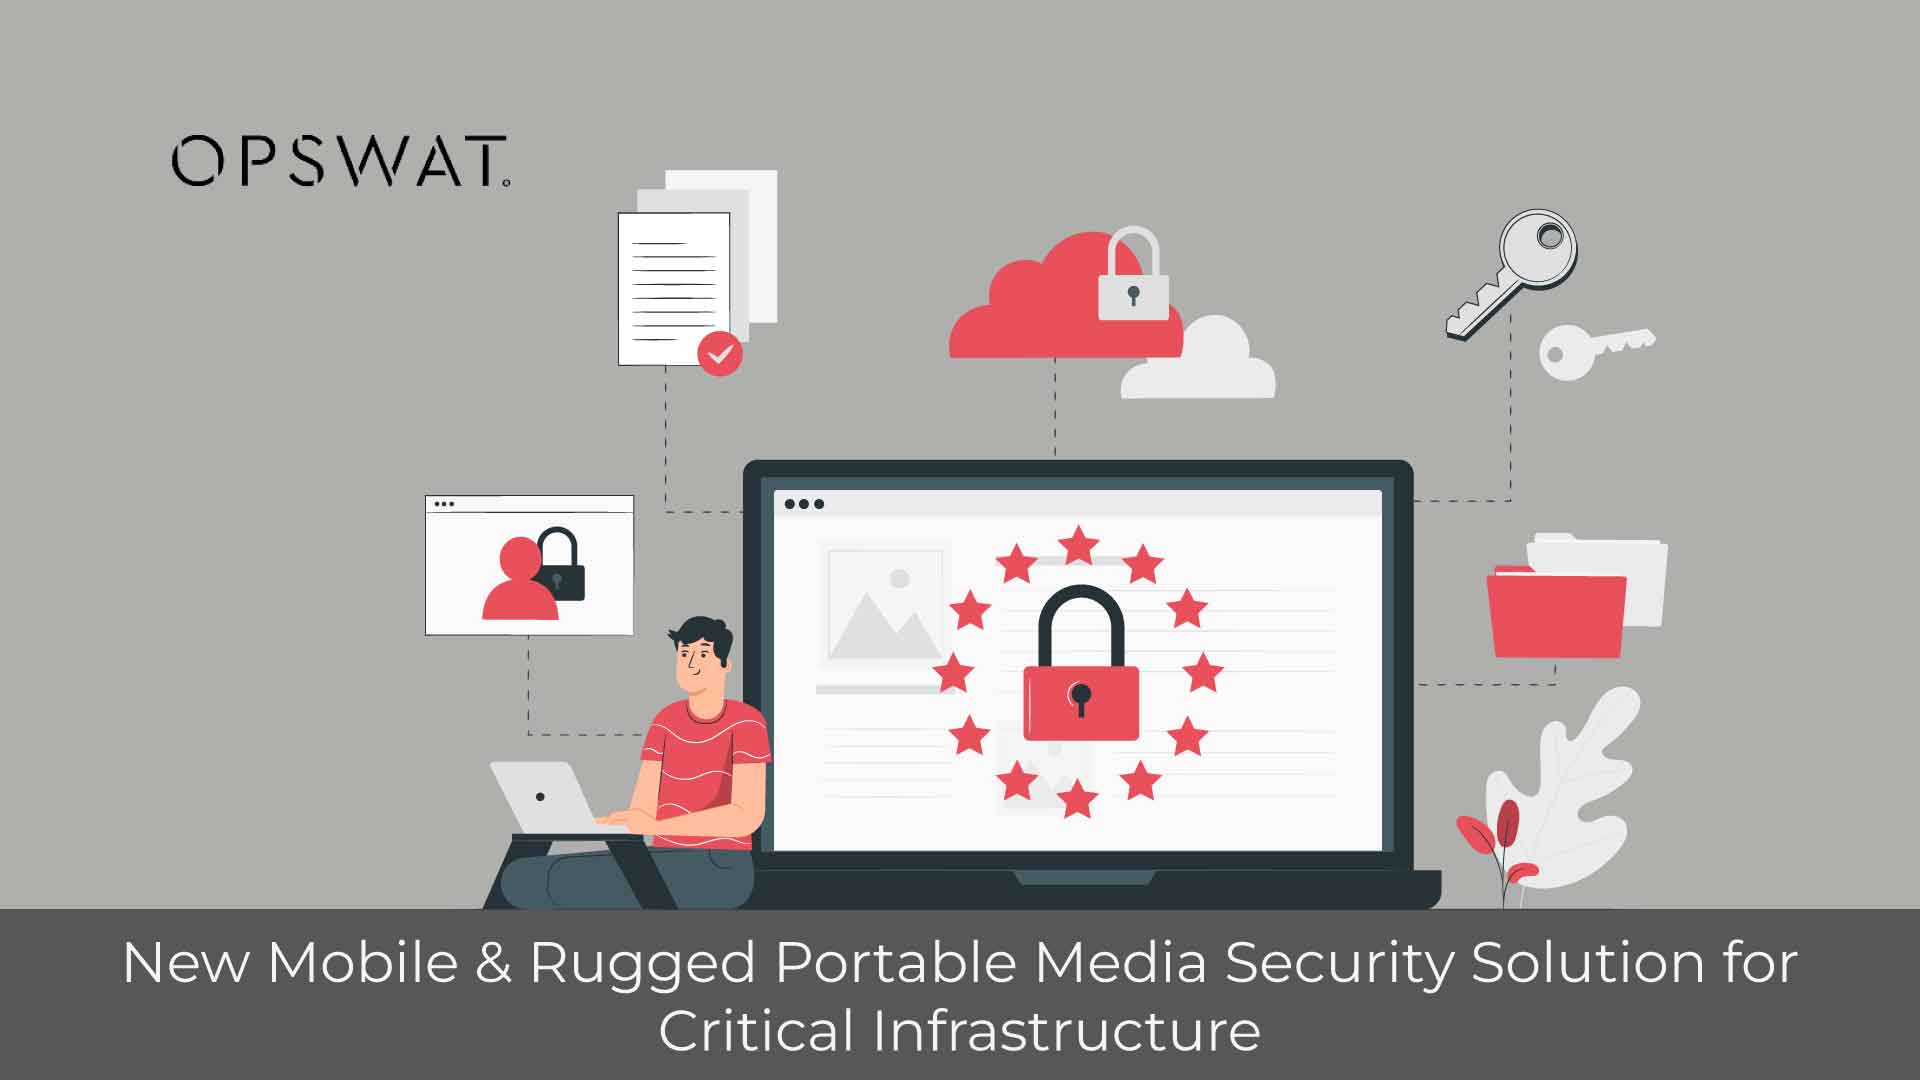 OPSWAT Unveils New Mobile & Rugged Portable Media Security Solution for Critical Infrastructure